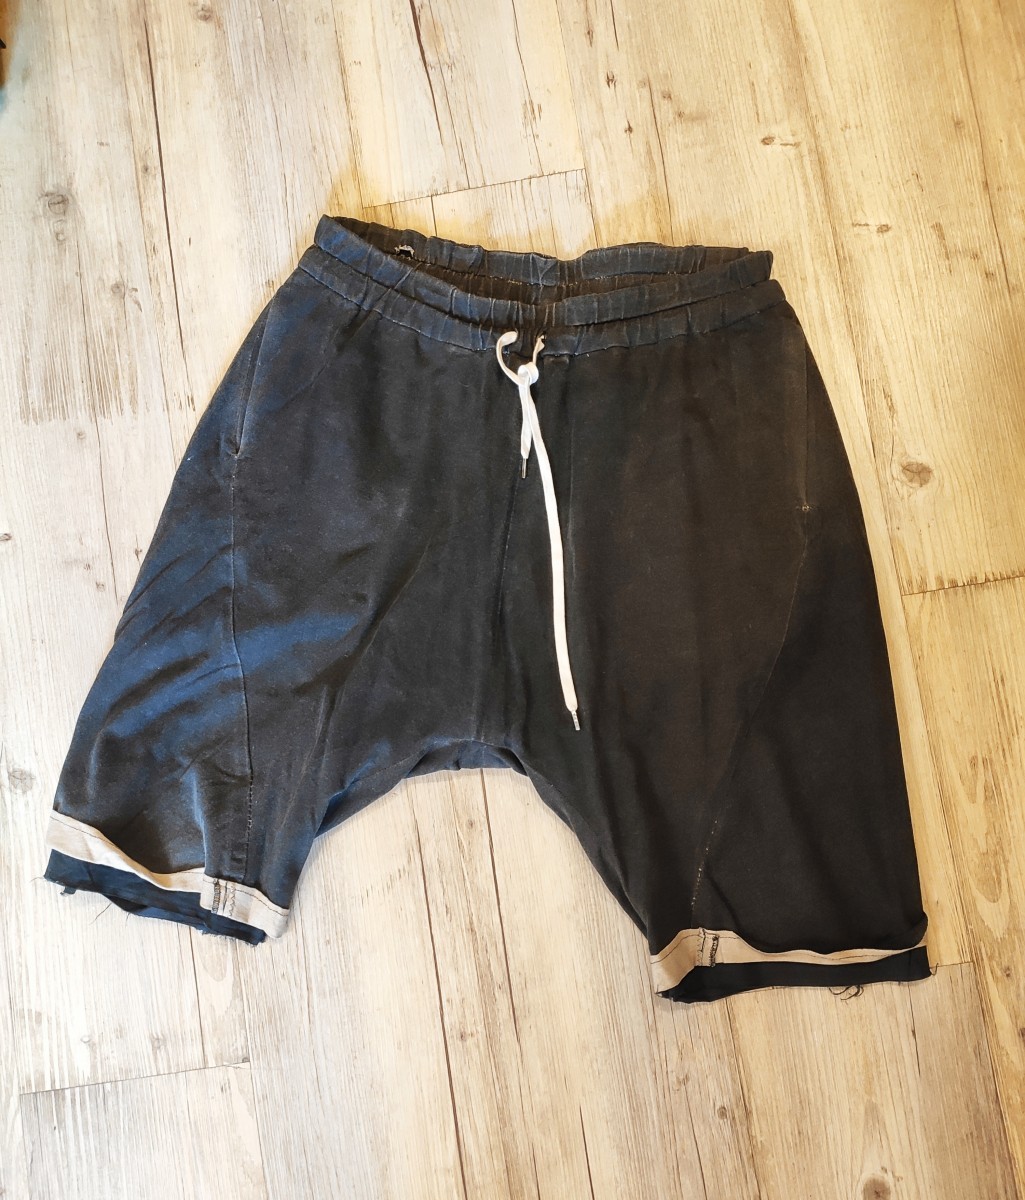 GRAIL! SS15 charcoal shorts. Like Paul Harnden or A1923 - 2